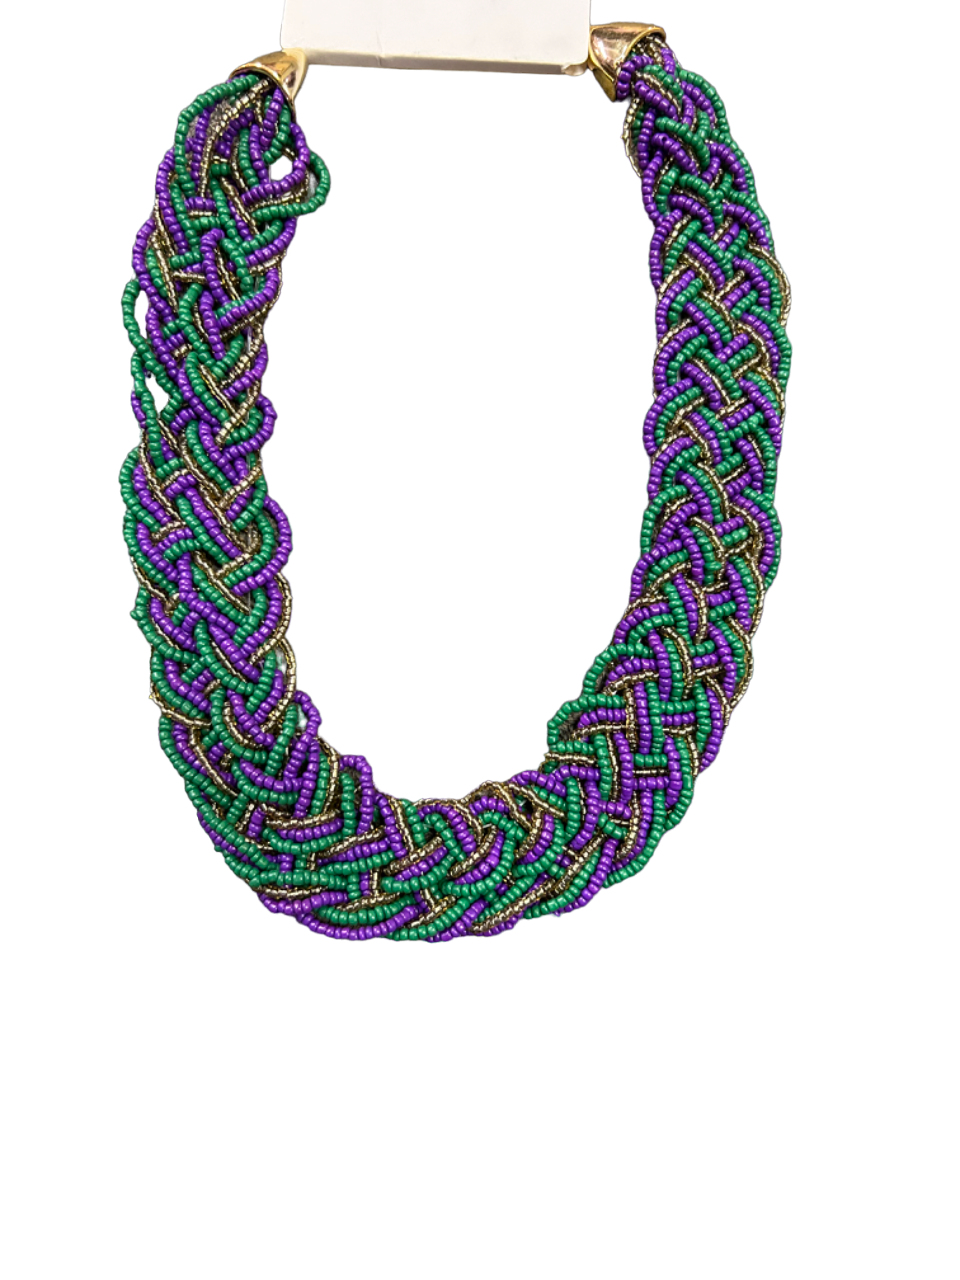 Purple Green and Gold Bead Braid Necklace